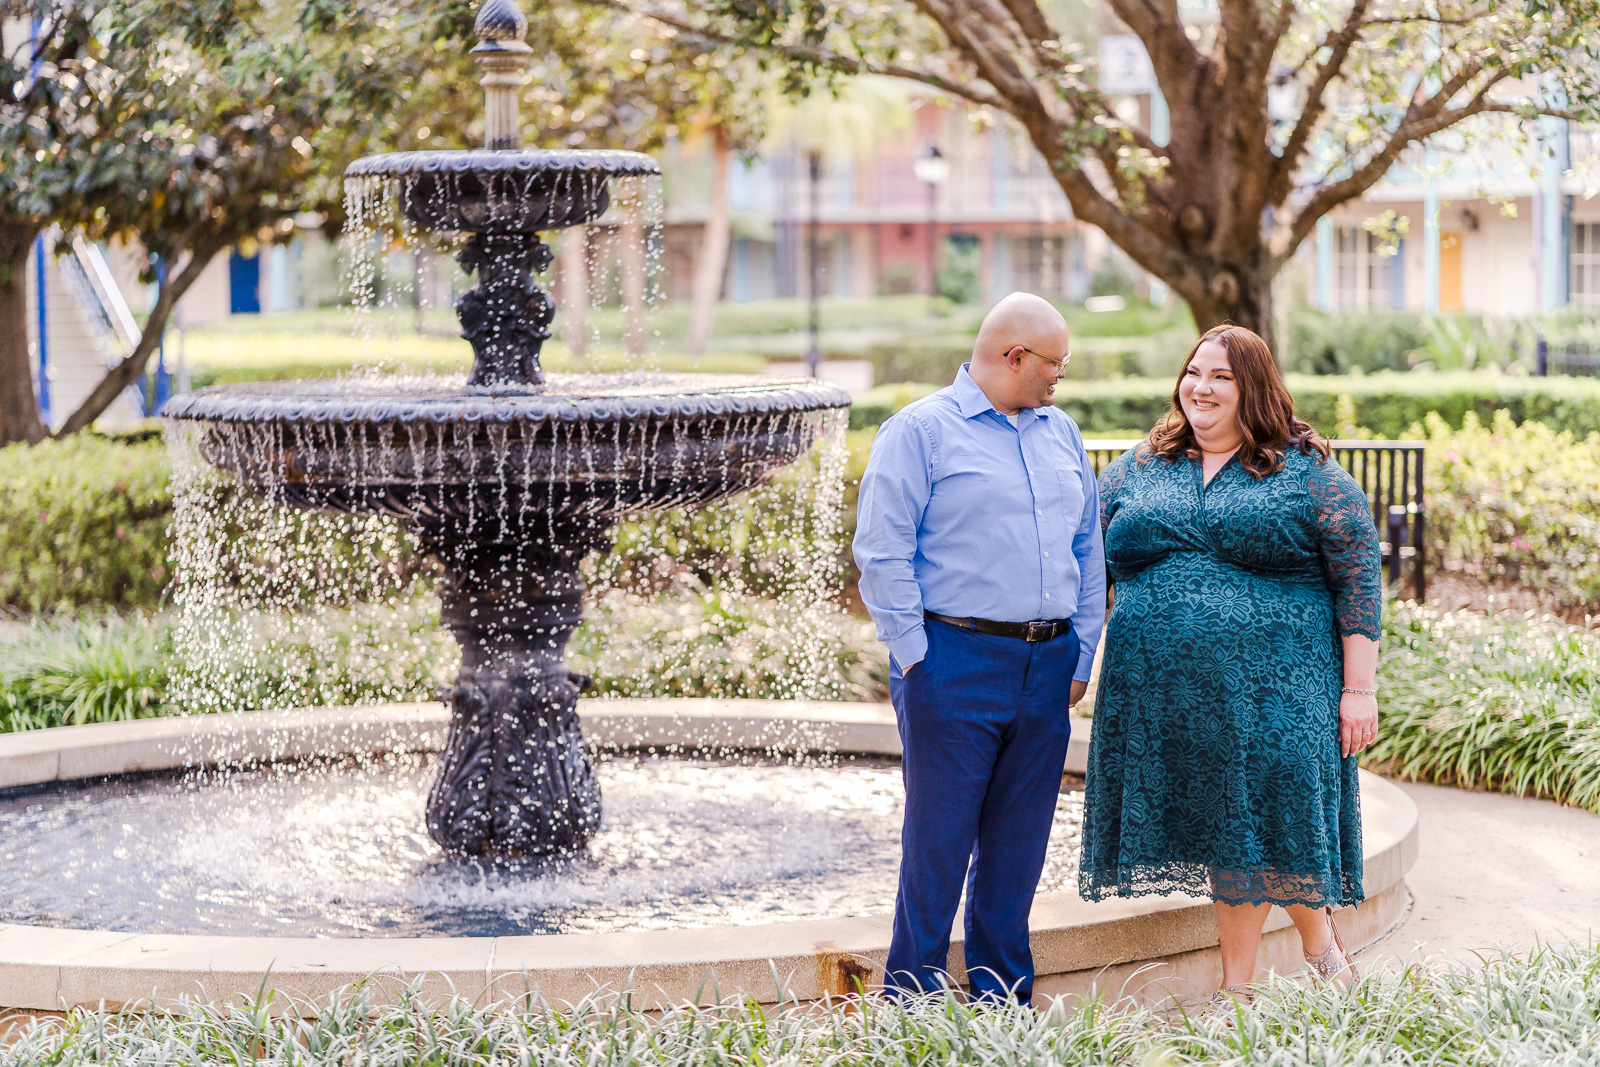 Romantic engagement photo at Disney Port Orleans resort with plus size bride in front of a fountain